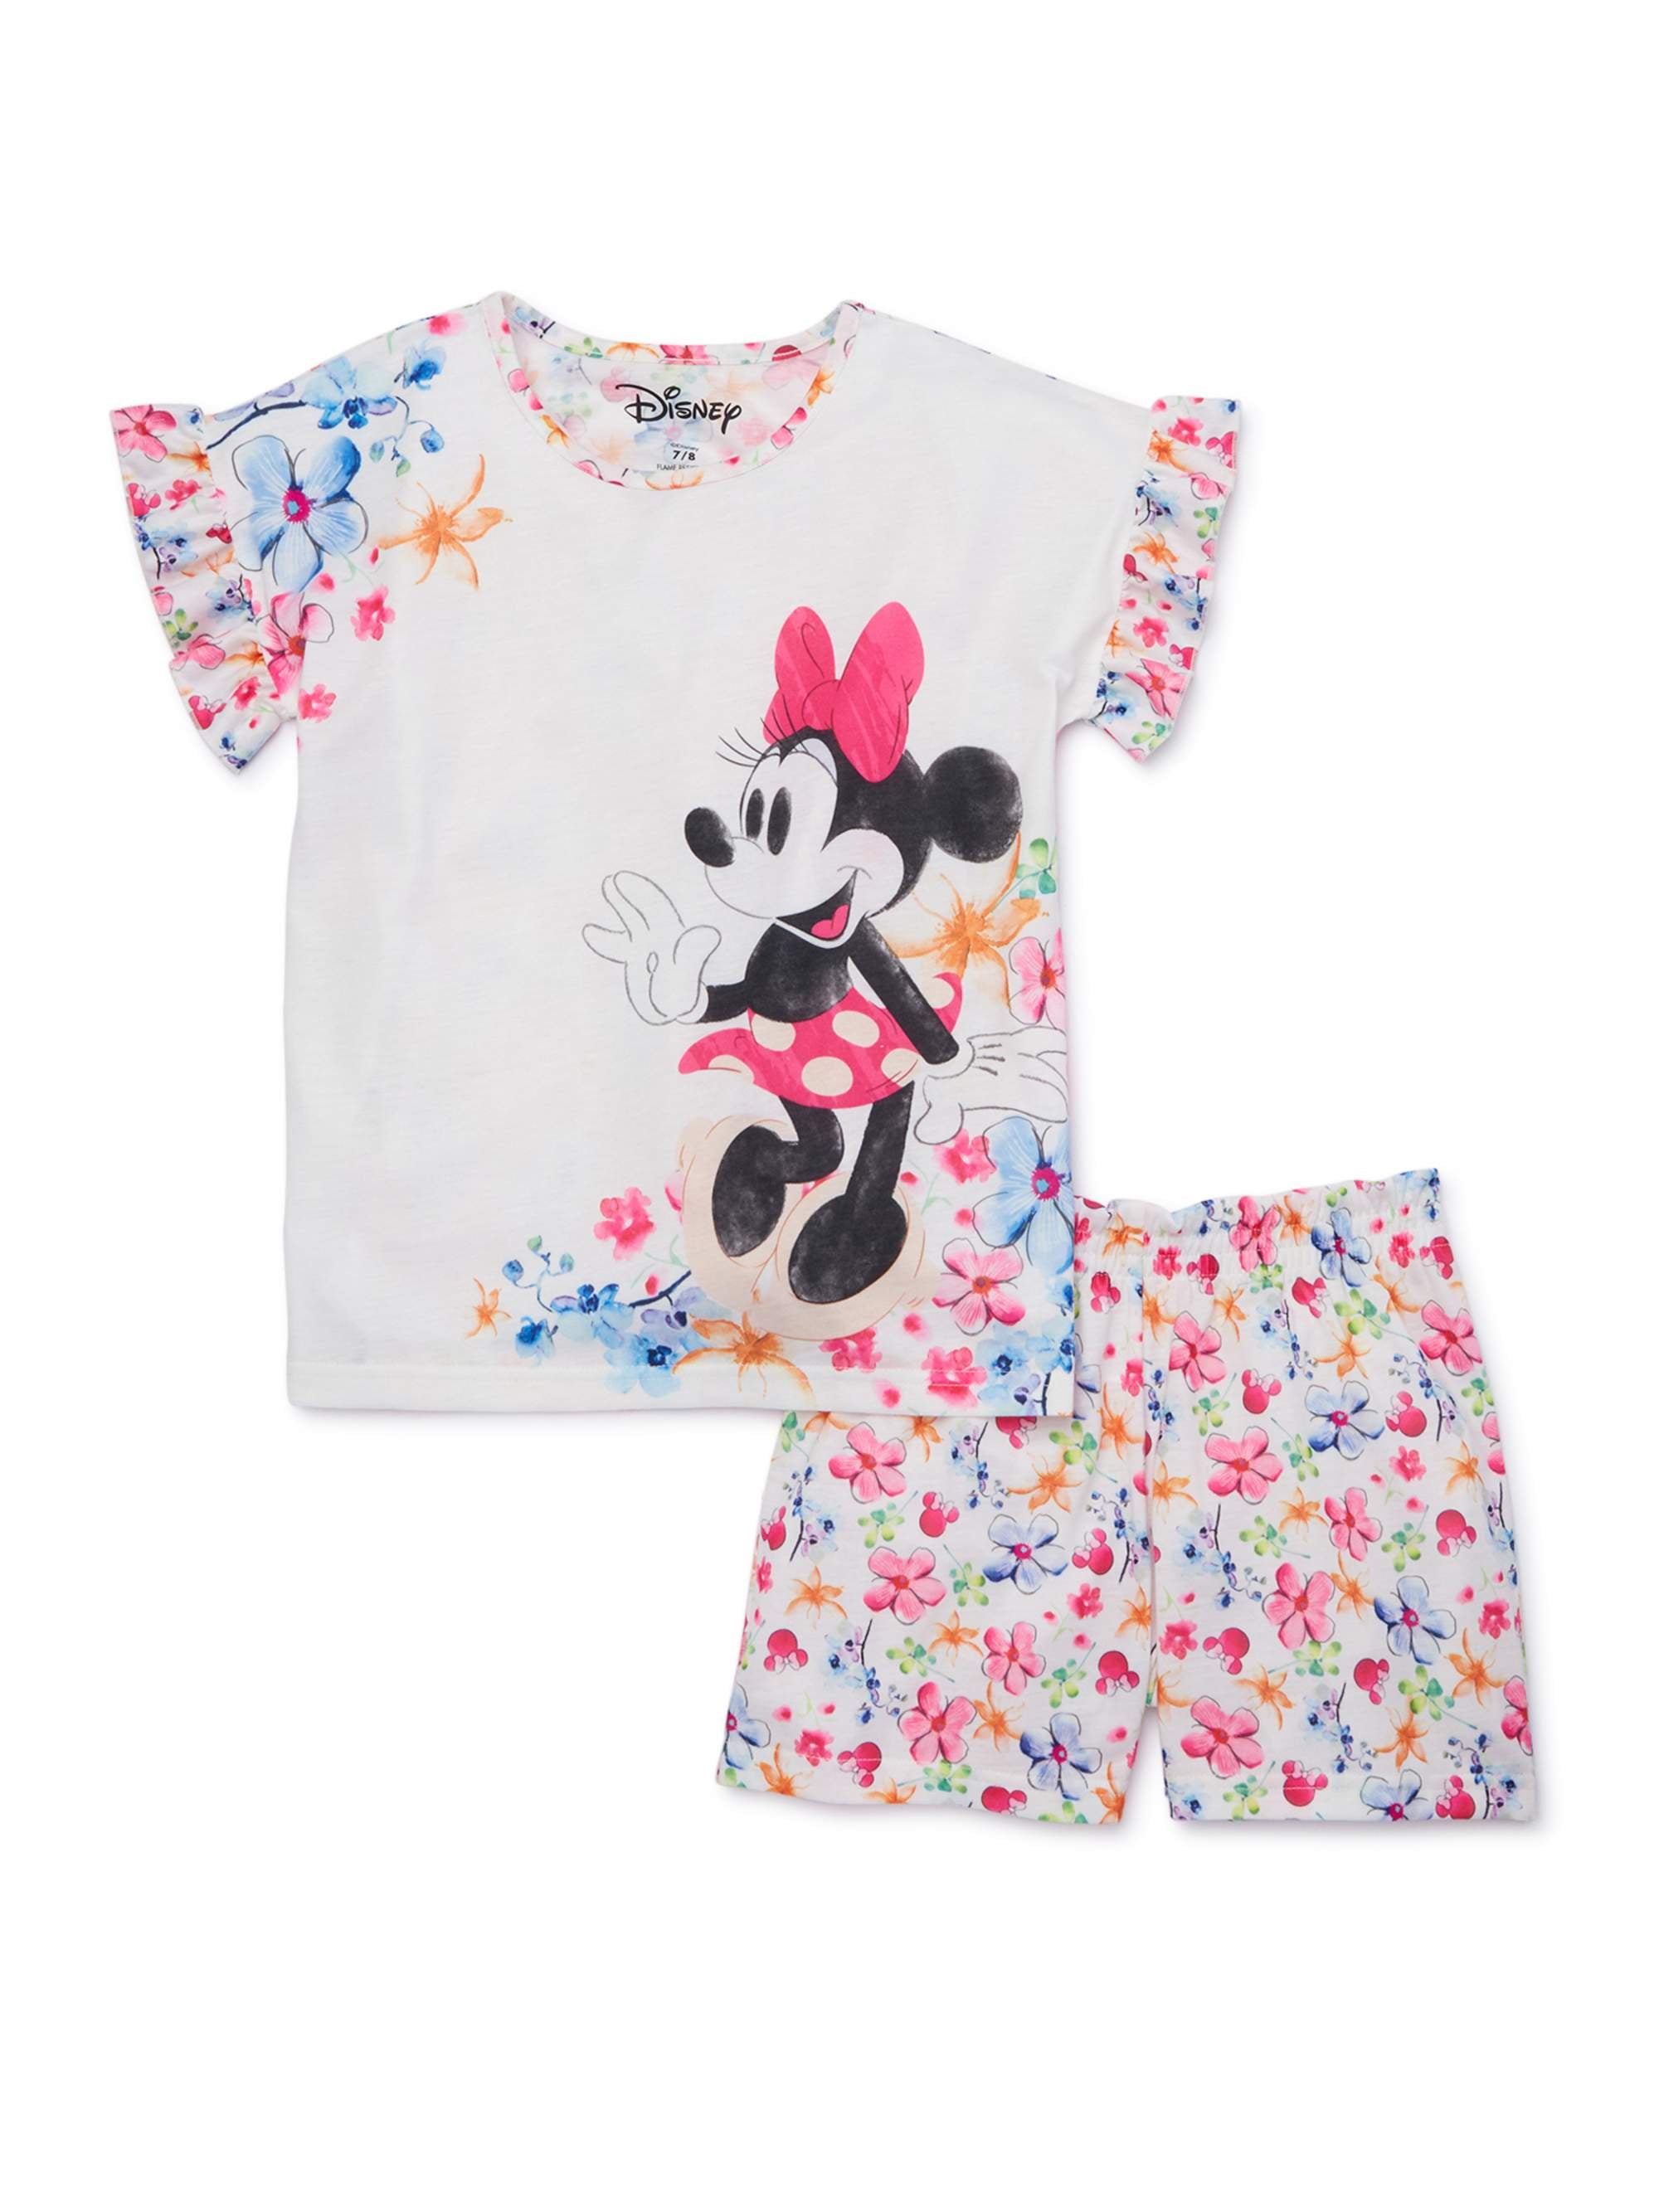 NEW Minnie Mouse Disney Figure Pajamas Outfit Baby Sleep Shirt Girls 12-24 Month